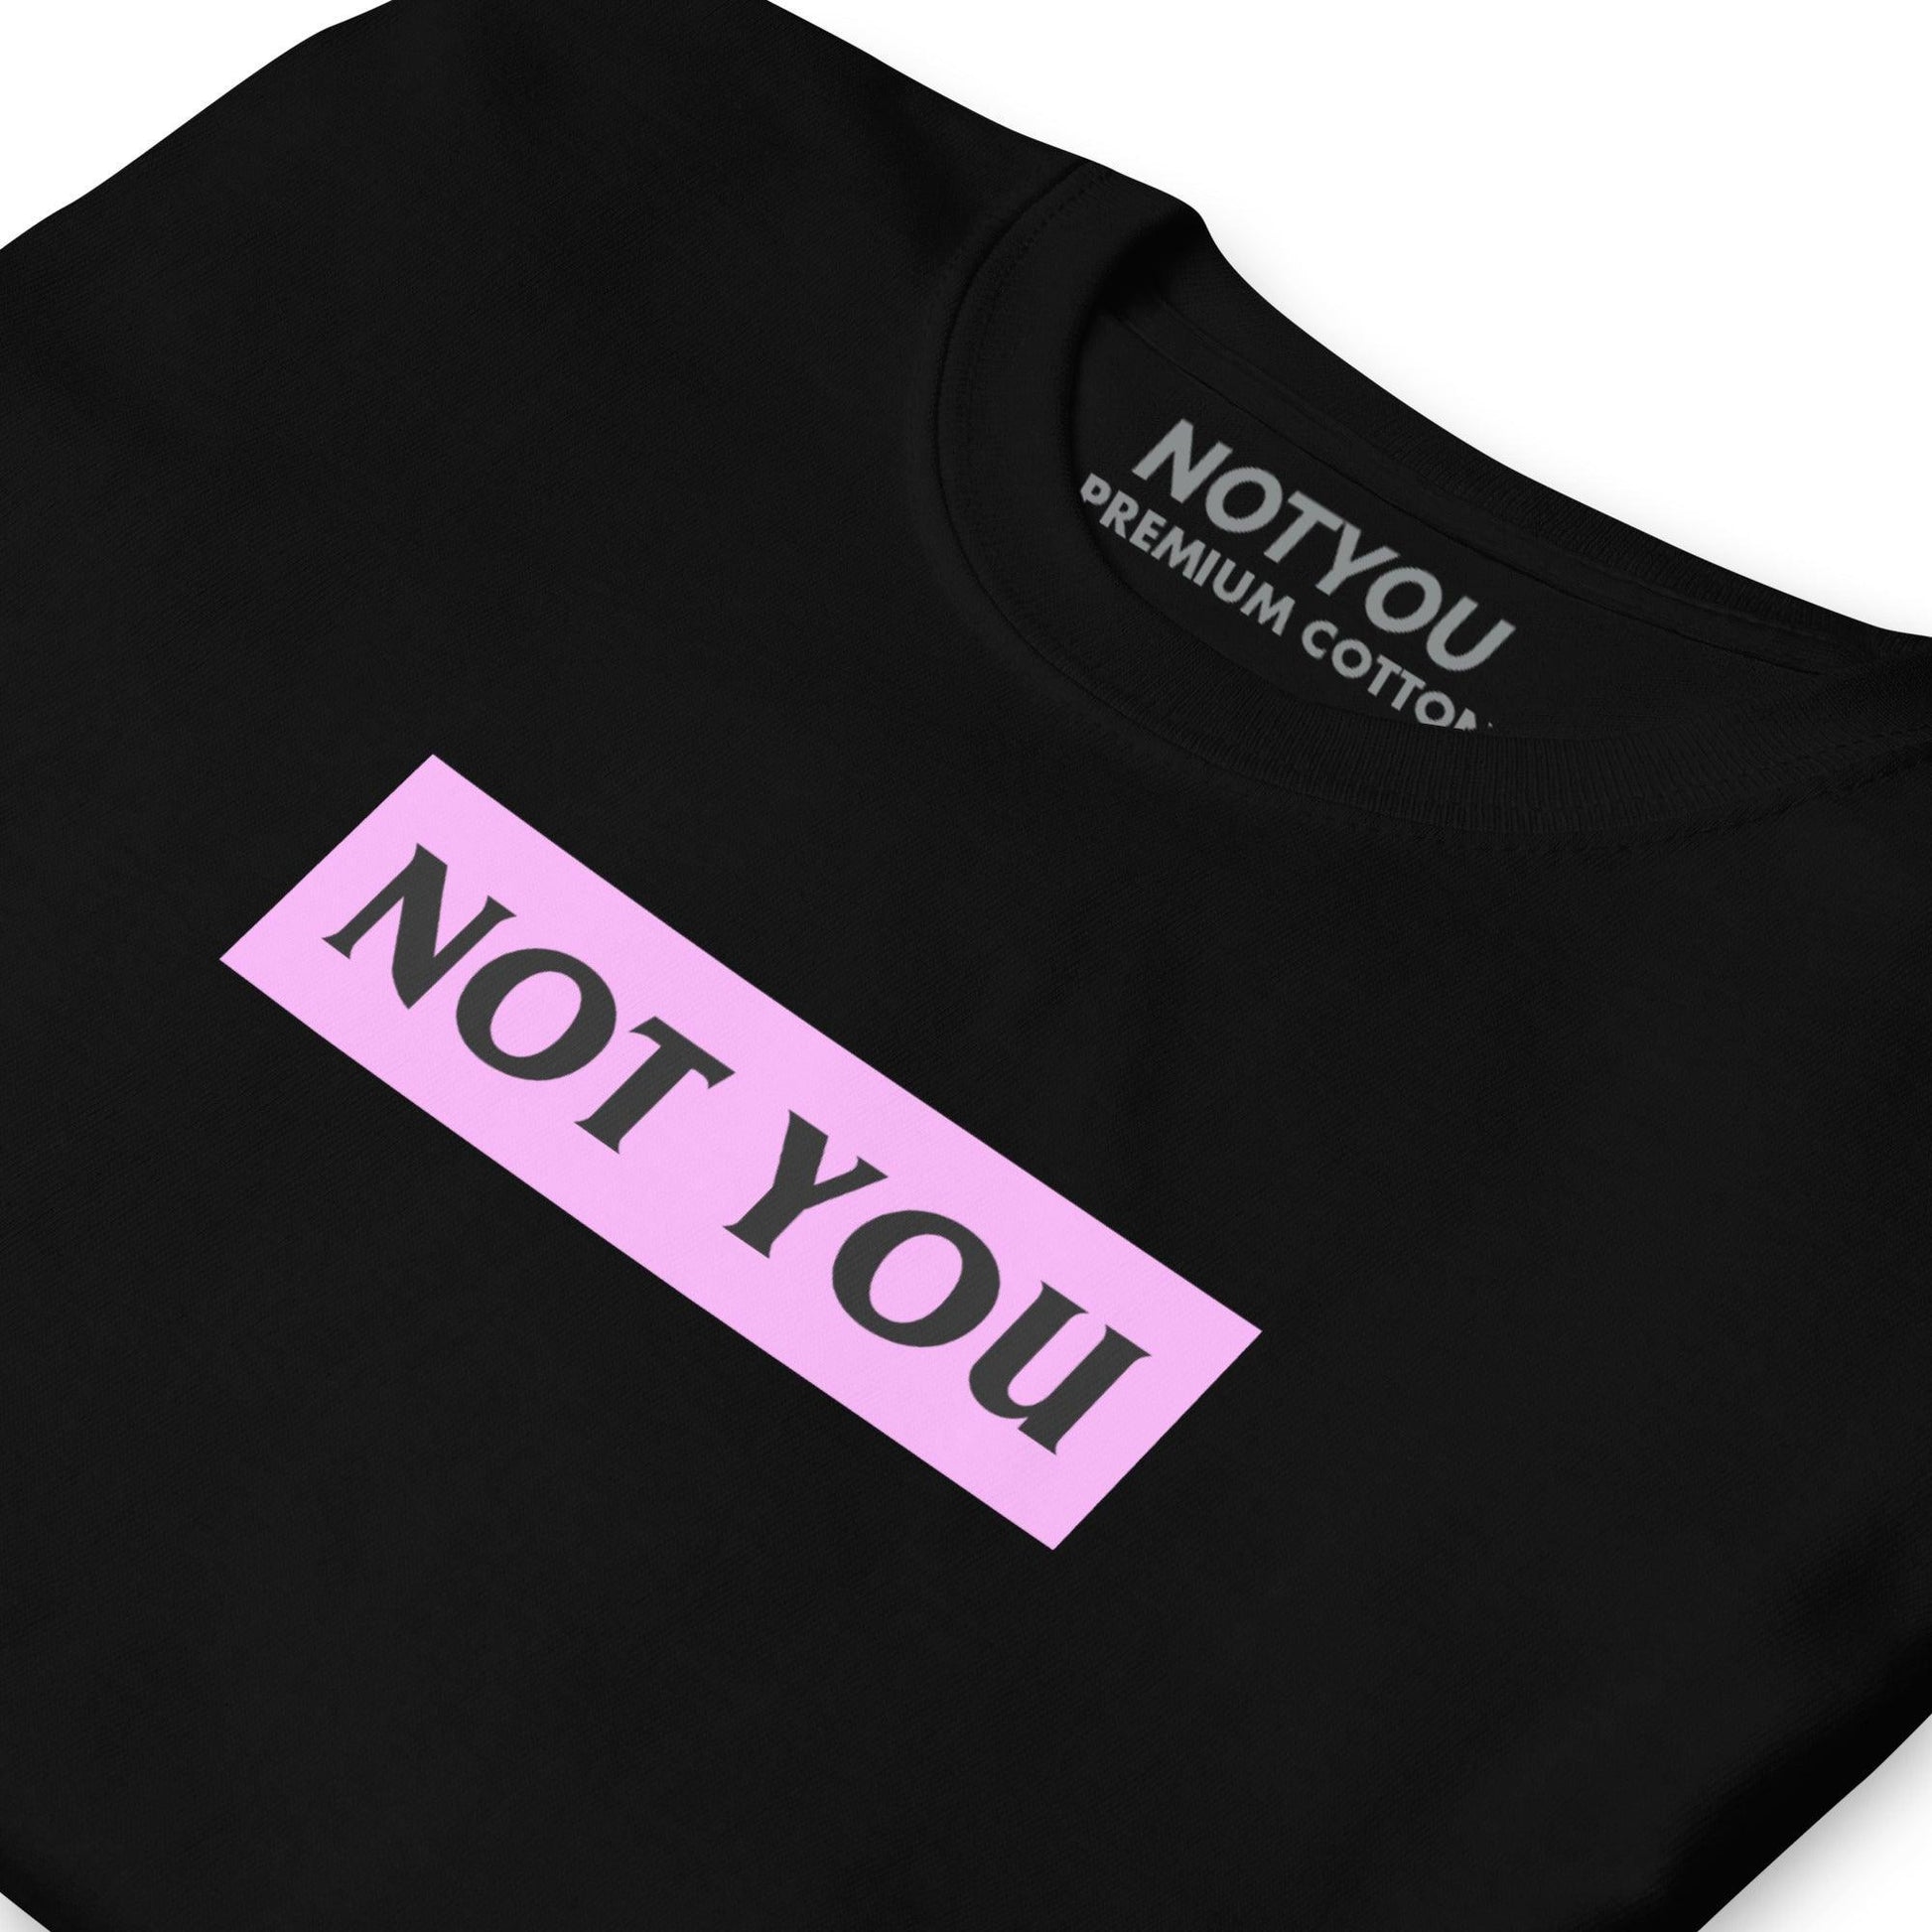 Remera Notyou Rose Icon Negro - Indy